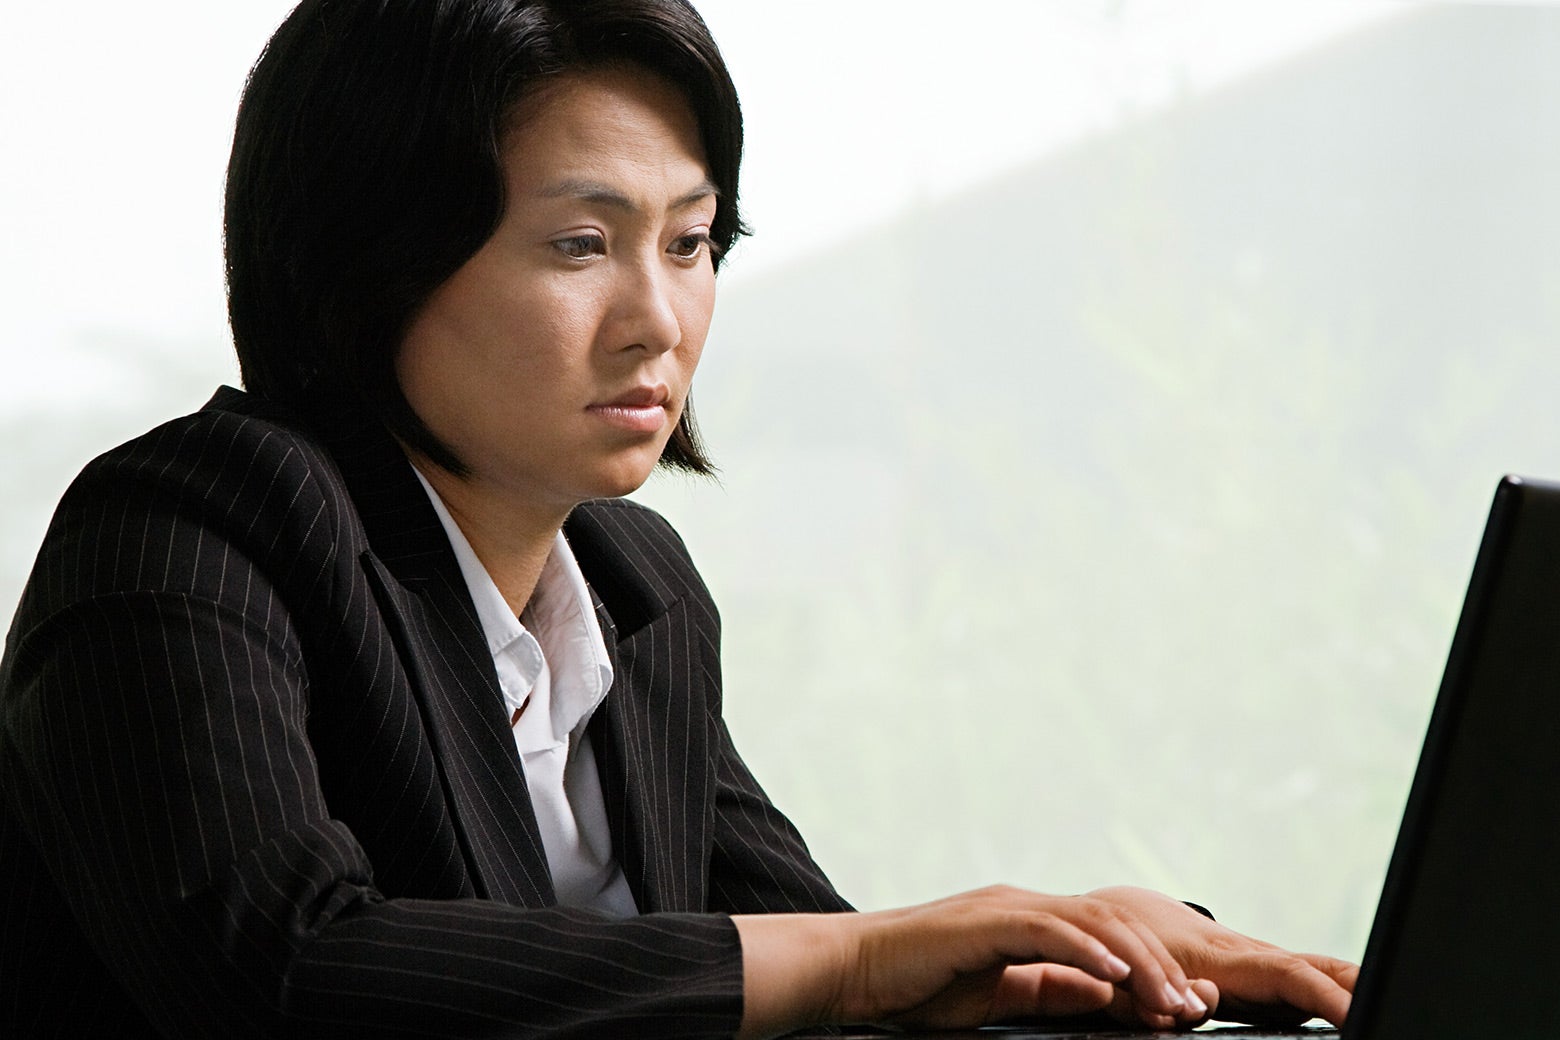 A woman staring at a laptop with glazed eyes.